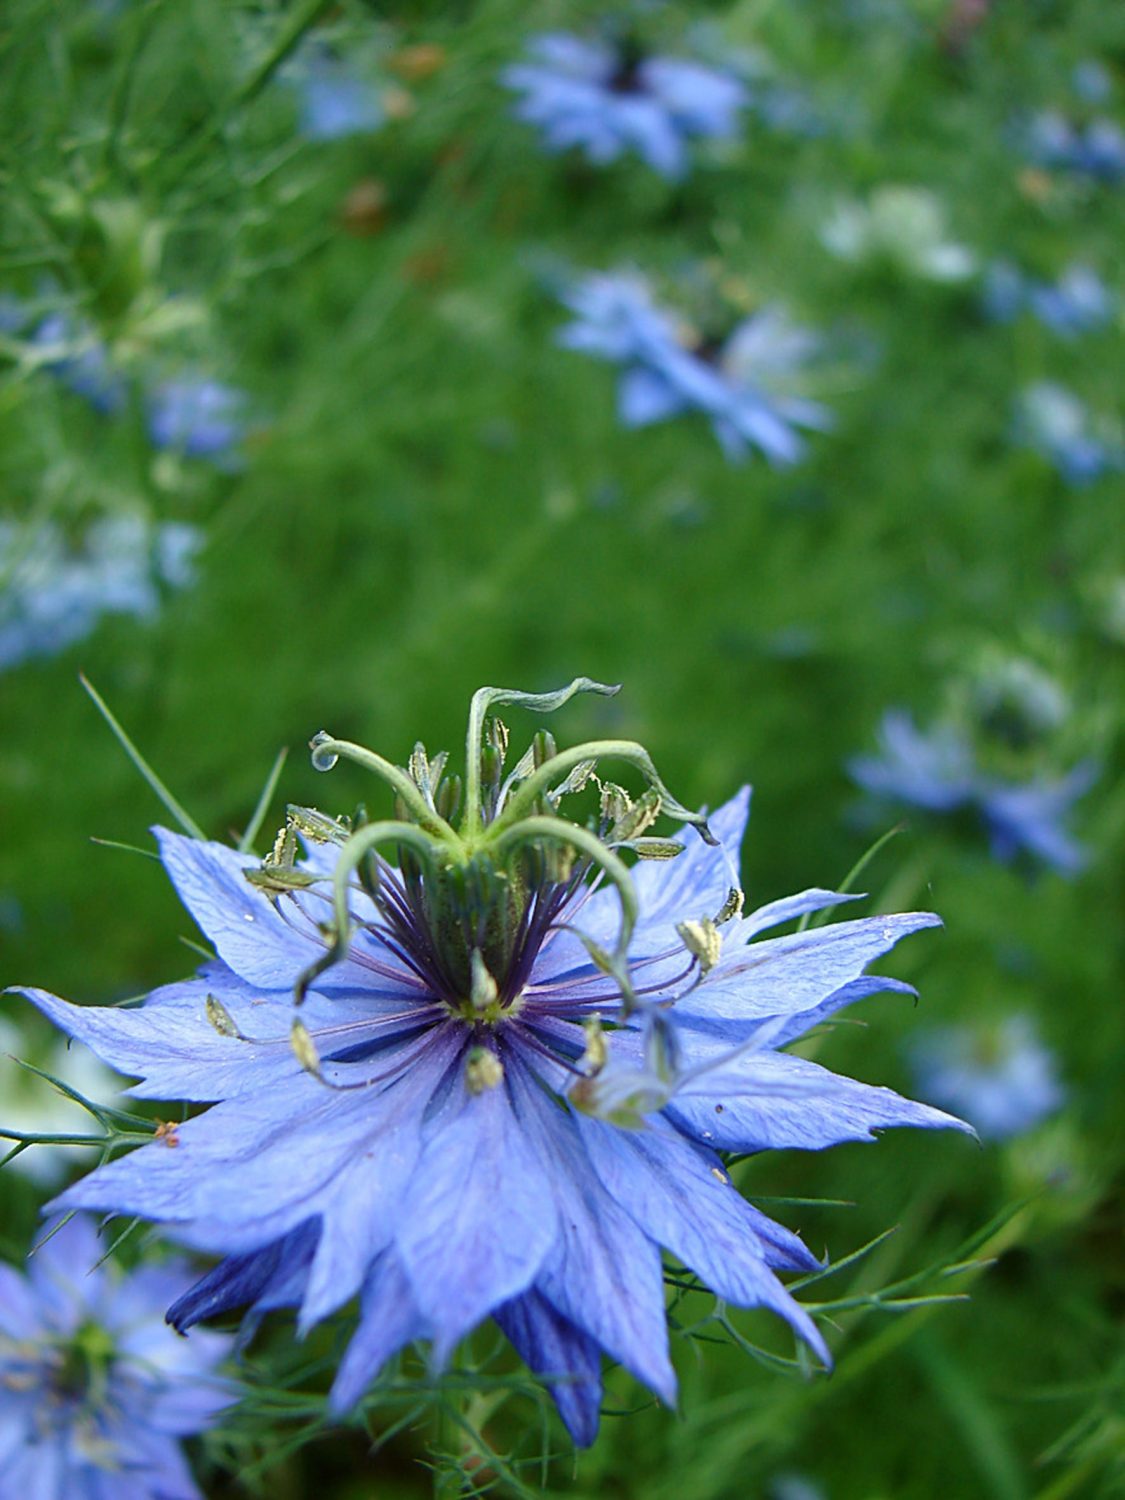 Nigella attract beneficial insects into the garden